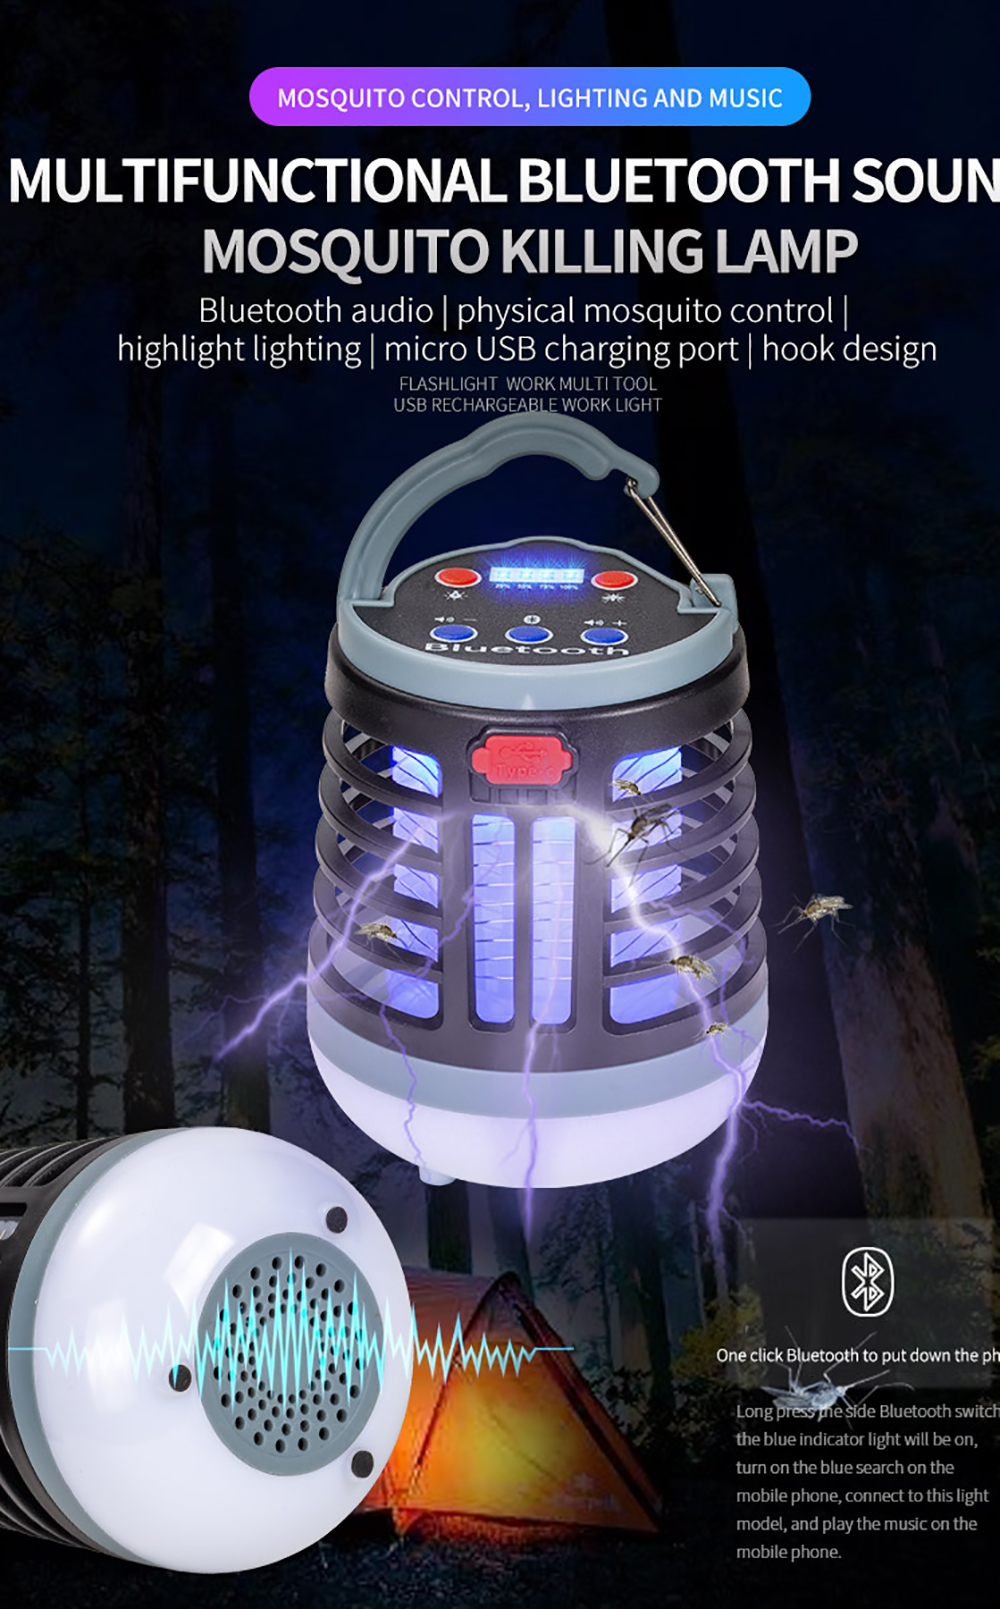 E-SMARTER-Multifunction-Mosquito-Killer-Lamp-With-LED-Camping-Lightbluetooth-Speaker-USB-Rechargeabl-1933889-1